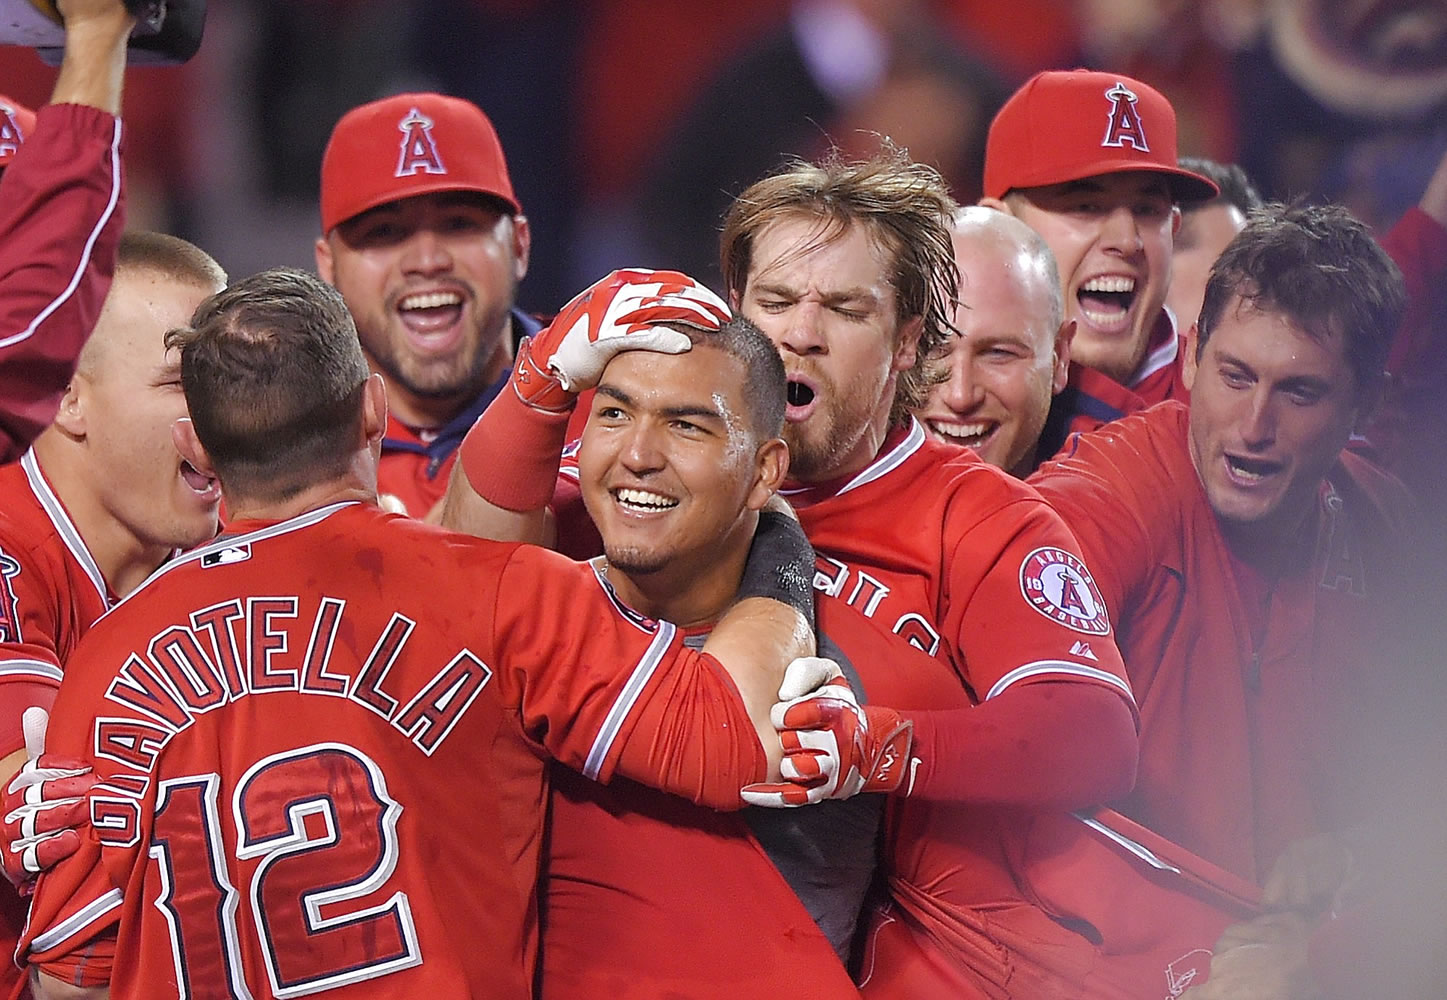 Los Angeles Angels' Carlos Perez, center, is surrounded by teammates after hitting a walk-off home run to beat the Seattle Mariners 5-4 in the ninth inning of a baseball game Tuesday, May 5, 2015, in Anaheim, Calif. (AP Photo/Mark J.